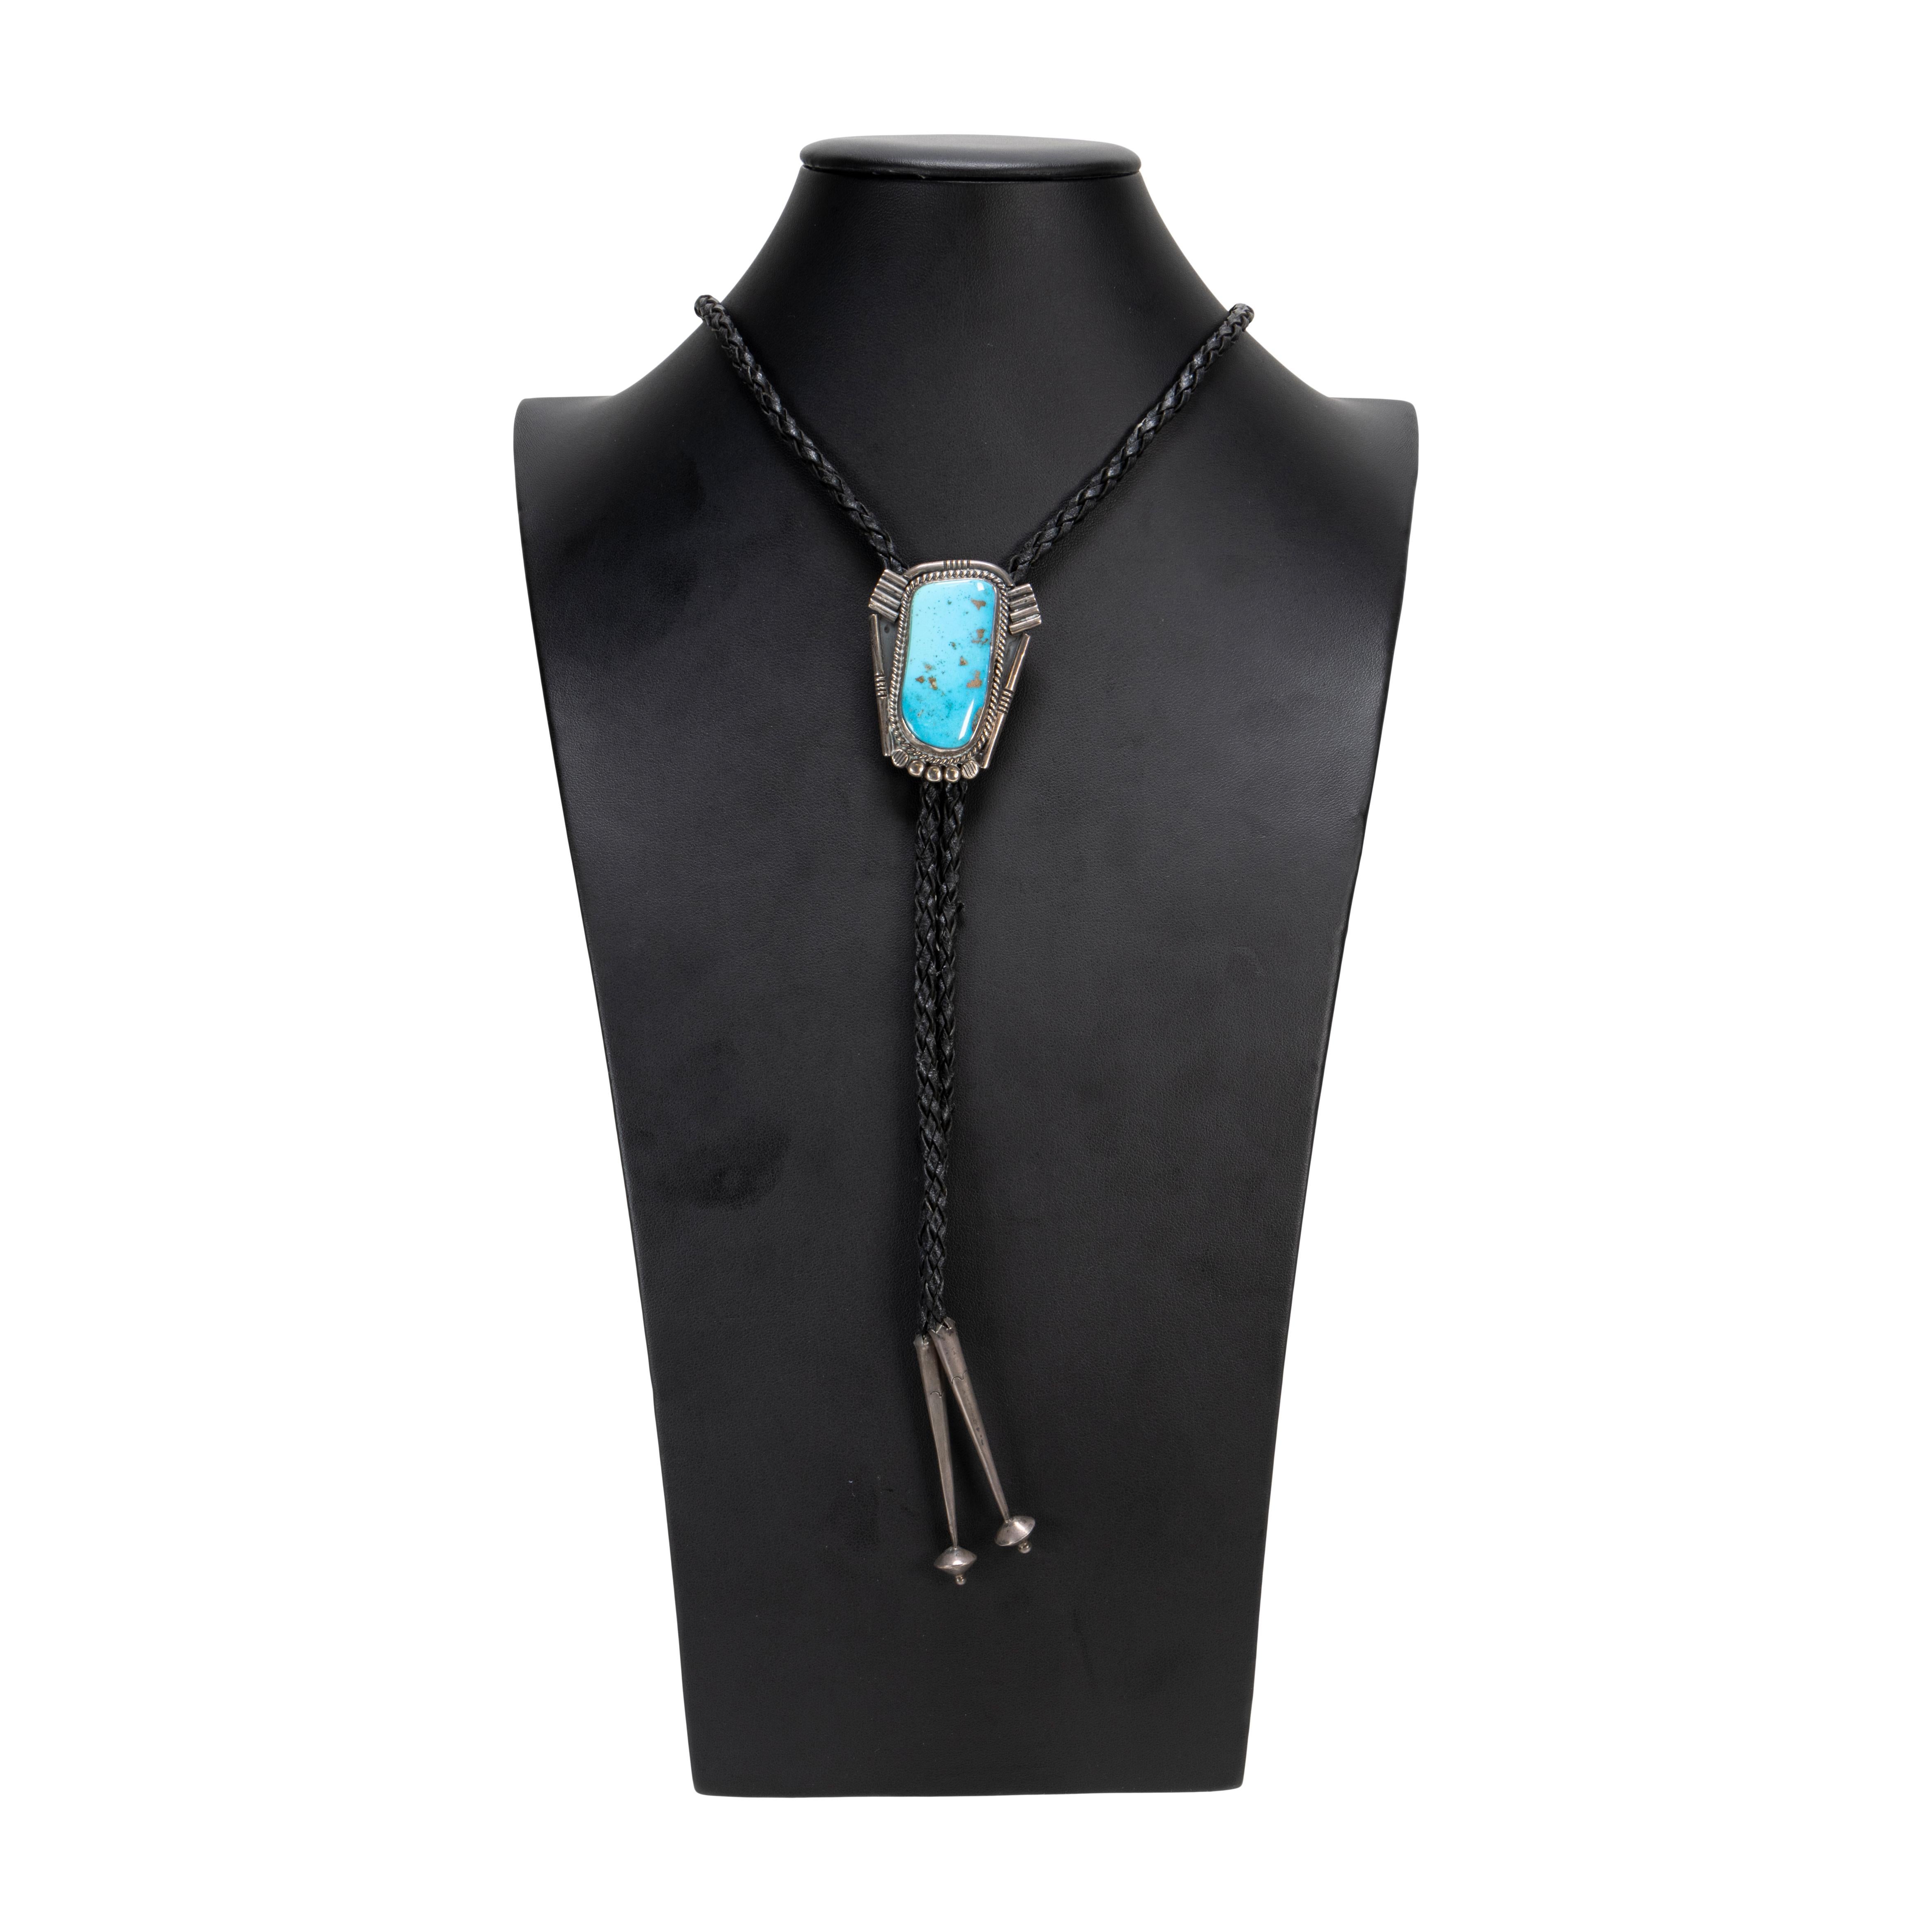 Navajo Morenci turquoise and sterling bolo tie. Nice sized stunning, natural and untreated stone surrounded by classic twisted rope border and shadowbox. No Maker's mark.

PERIOD: Mid 20th Century
ORIGIN: Southwest - Navajo, Native American
SIZE: 2